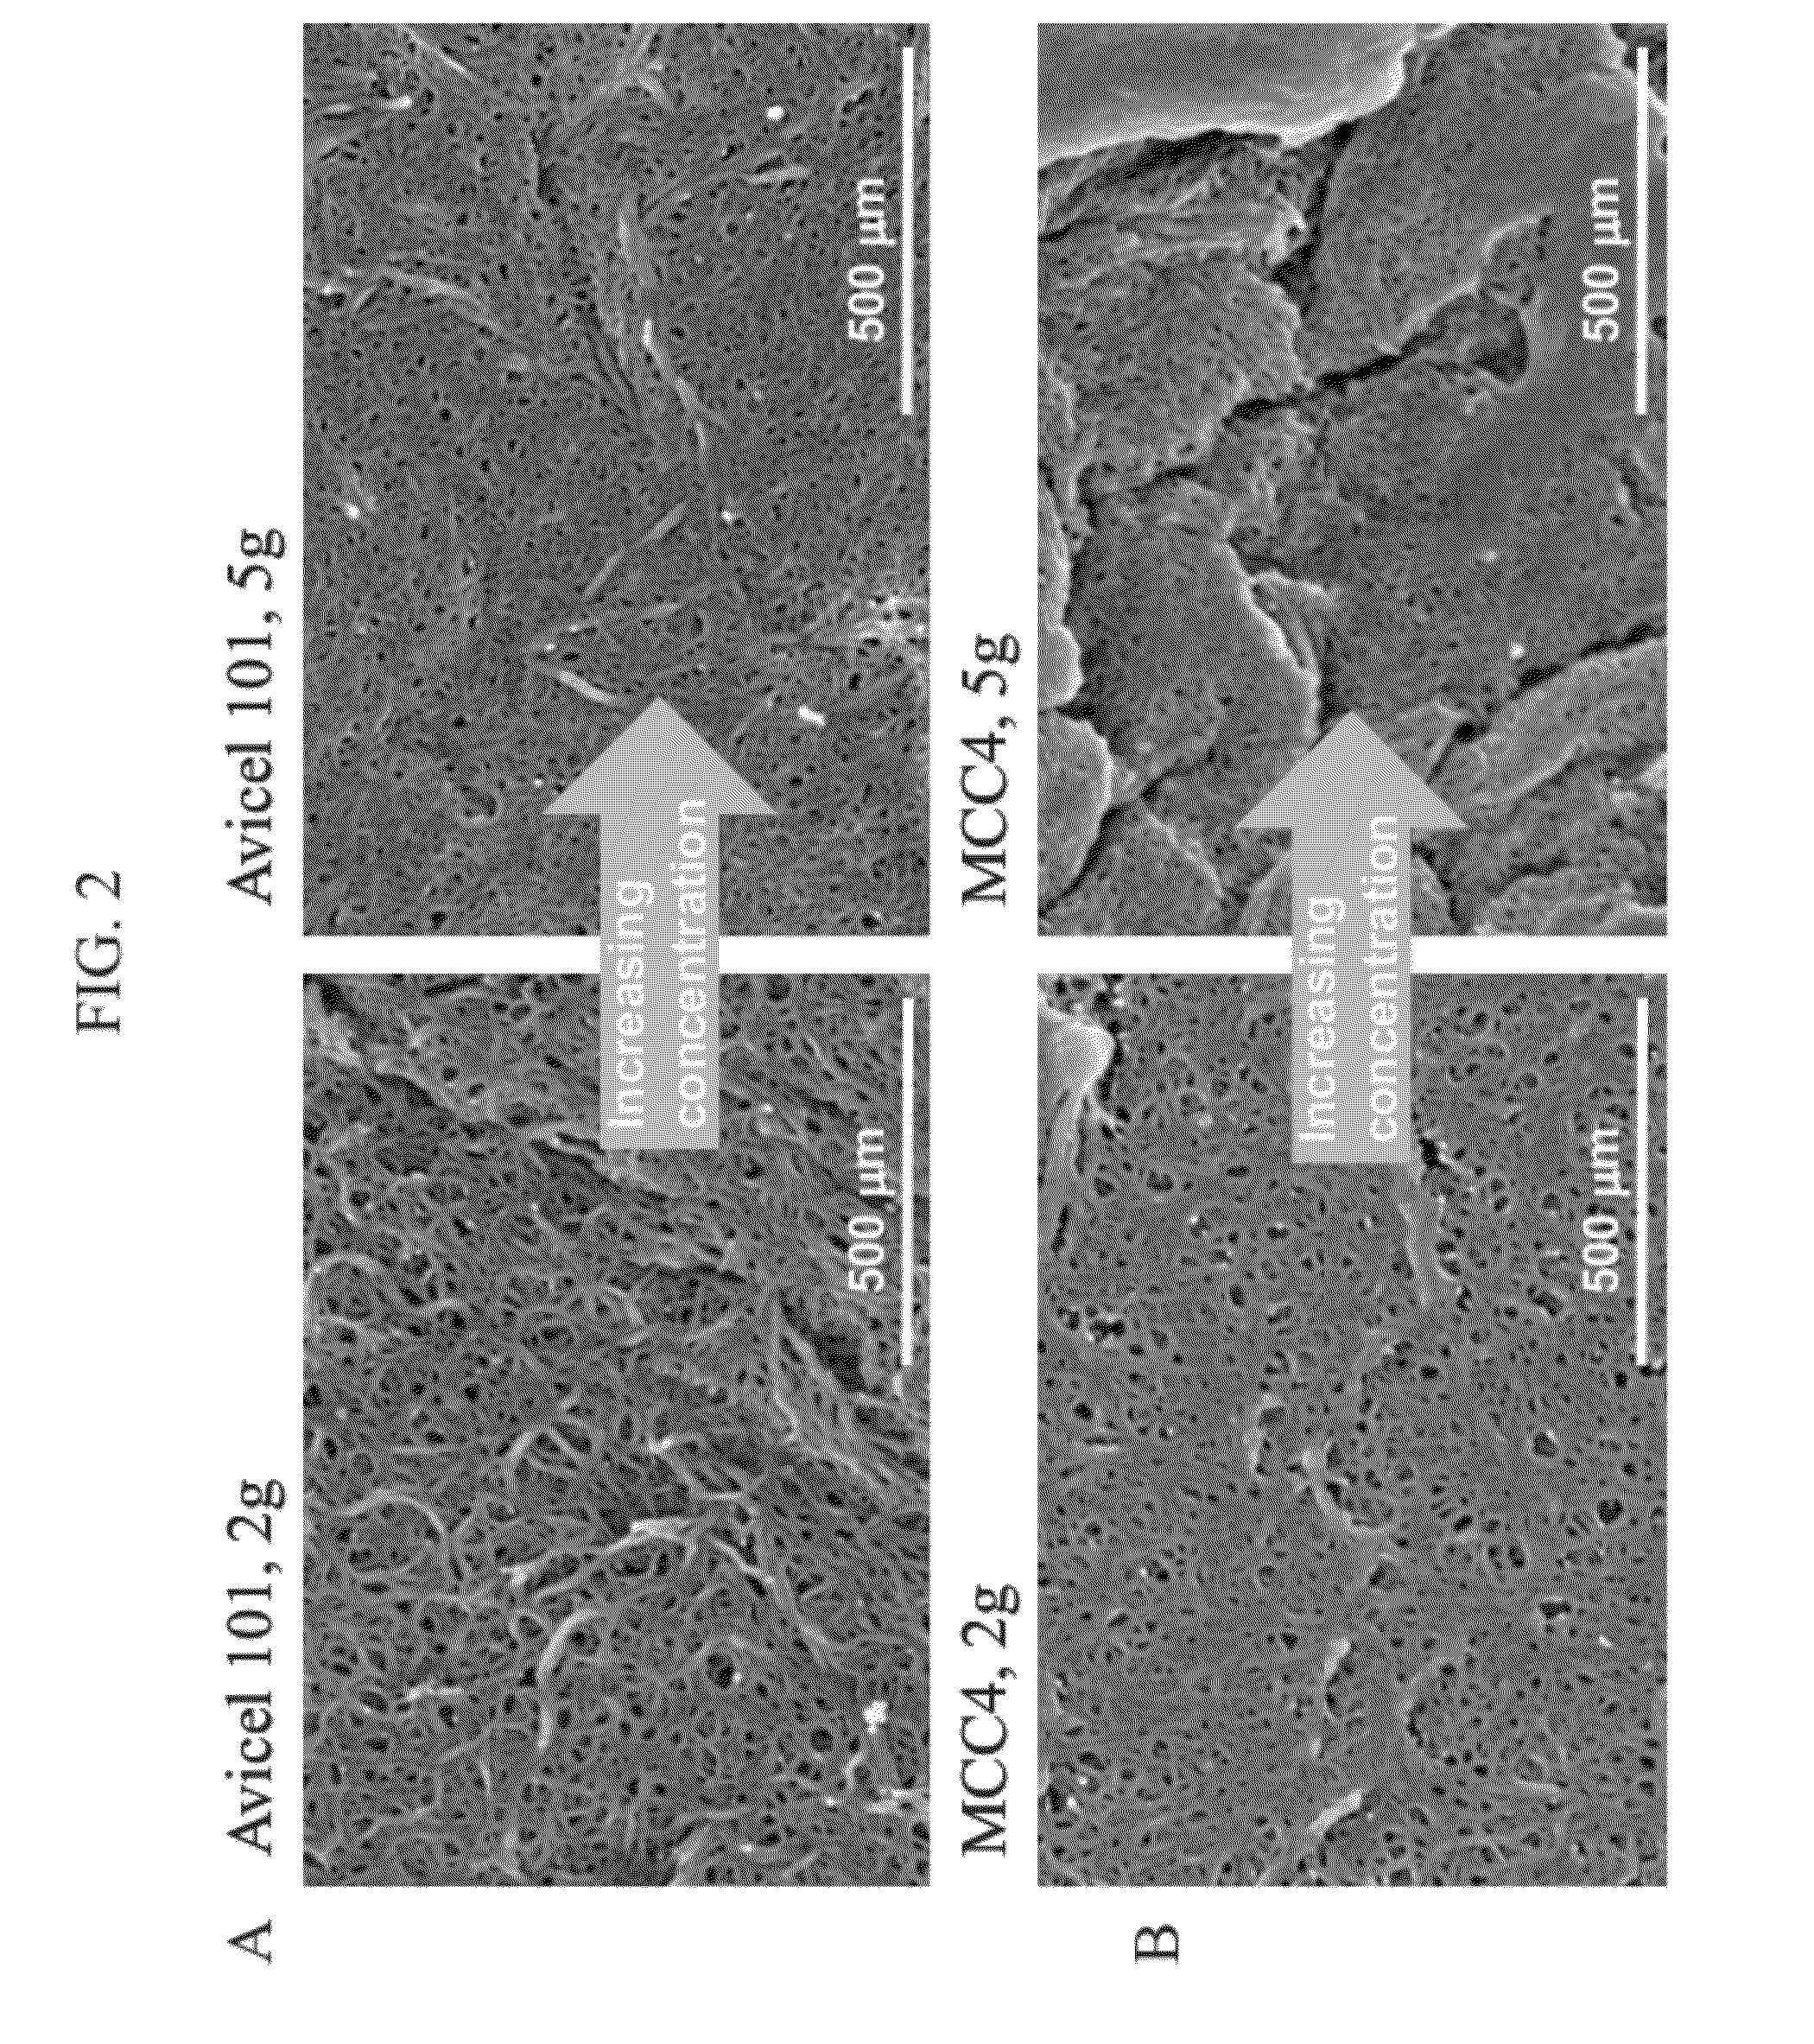 Wound Healing Compositions Comprising Biocompatible Cellulose Hydrogel Membranes and Methods of Use Thereof